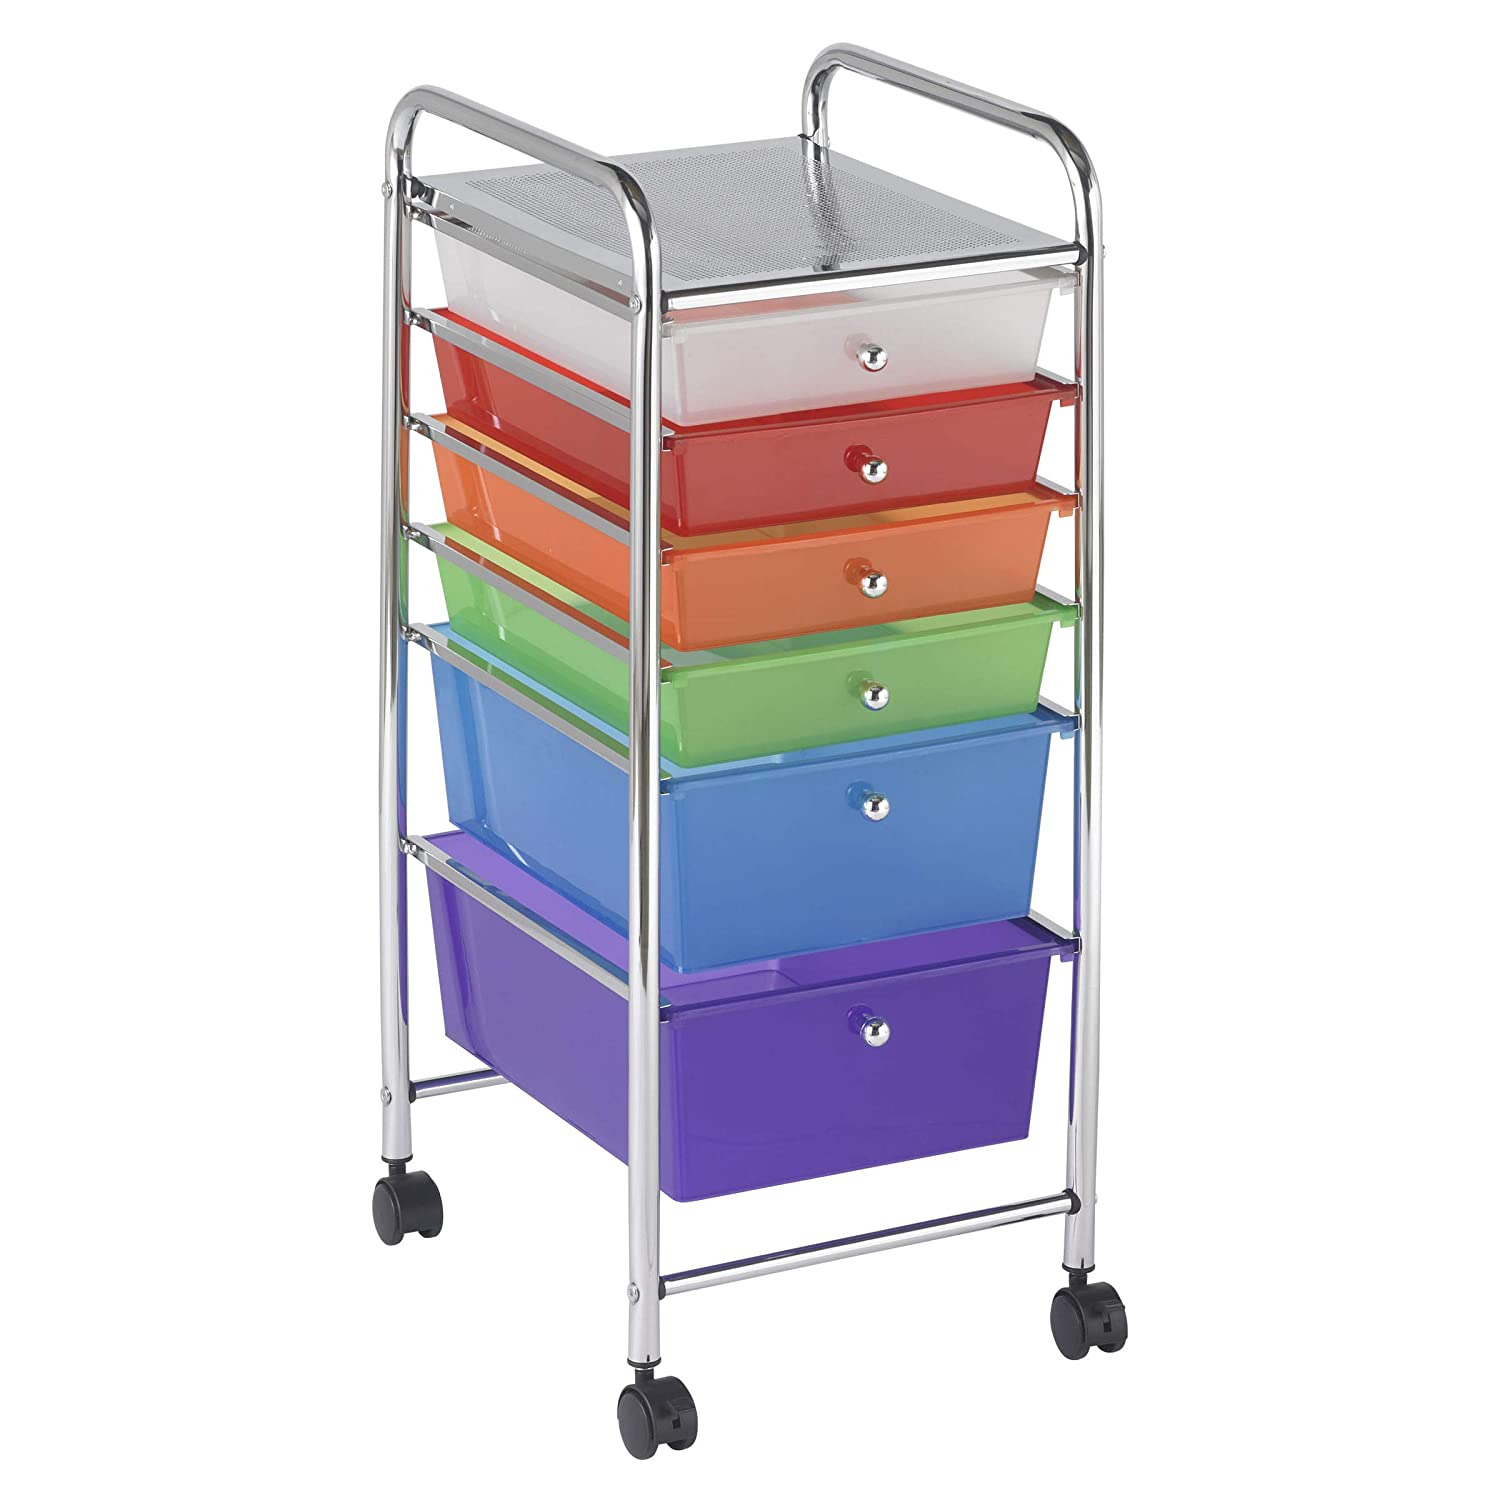 -elr-20102- 6-drawer Mobile Organizer, Assorted Colors